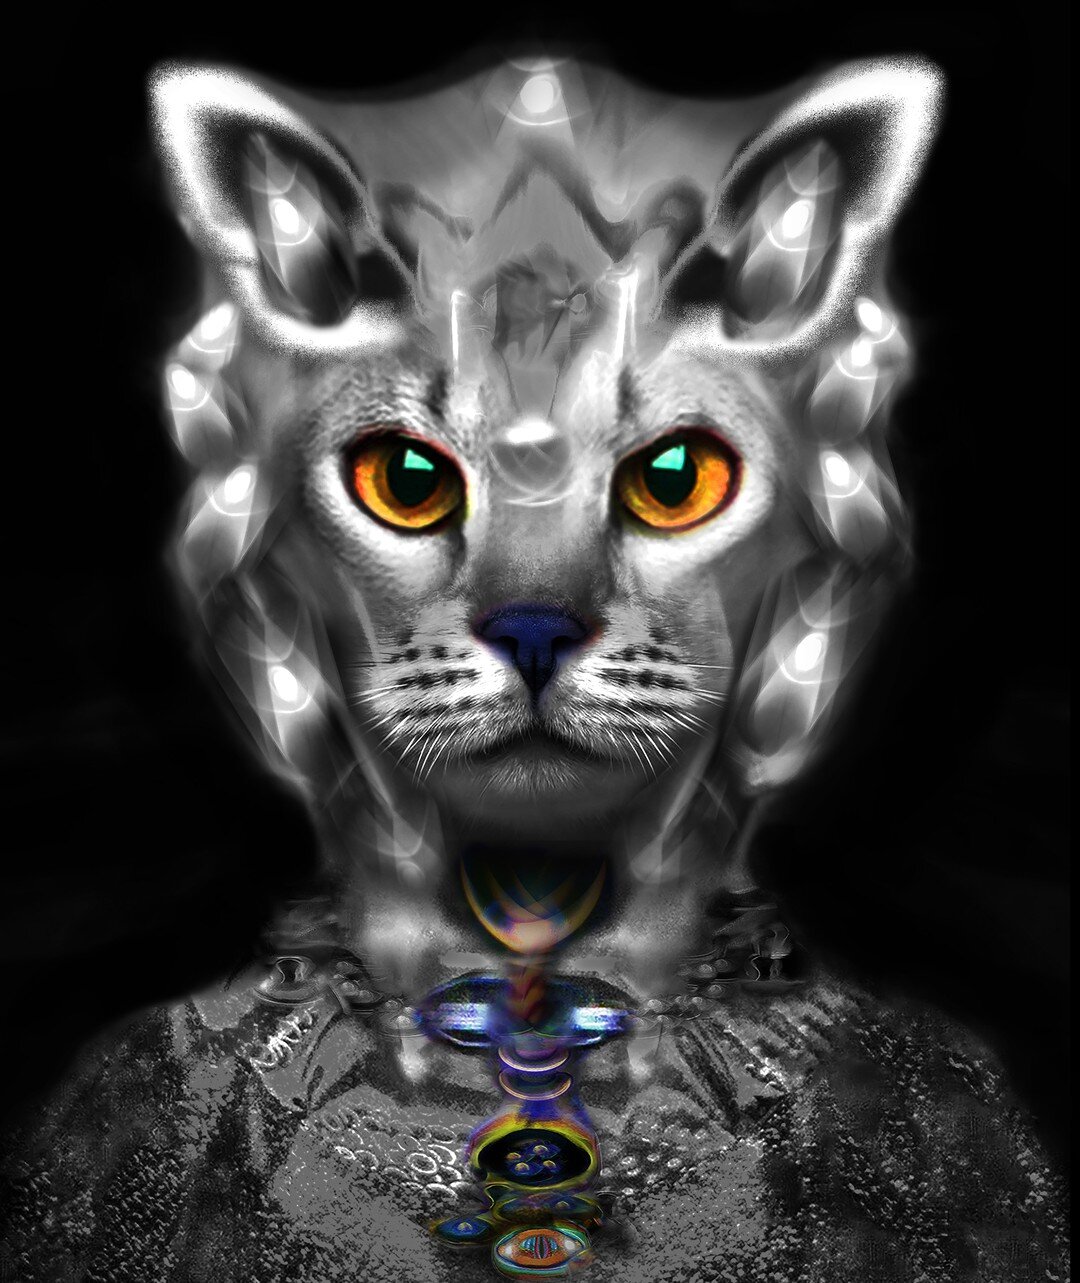 𝘼 𝘾𝙖𝙩'𝙨 𝙈𝙞𝙣𝙙 
The Great Horned Greta
digital photograph
24 x 16 inches
or dimensions variable
&copy; Gary Justis 2020